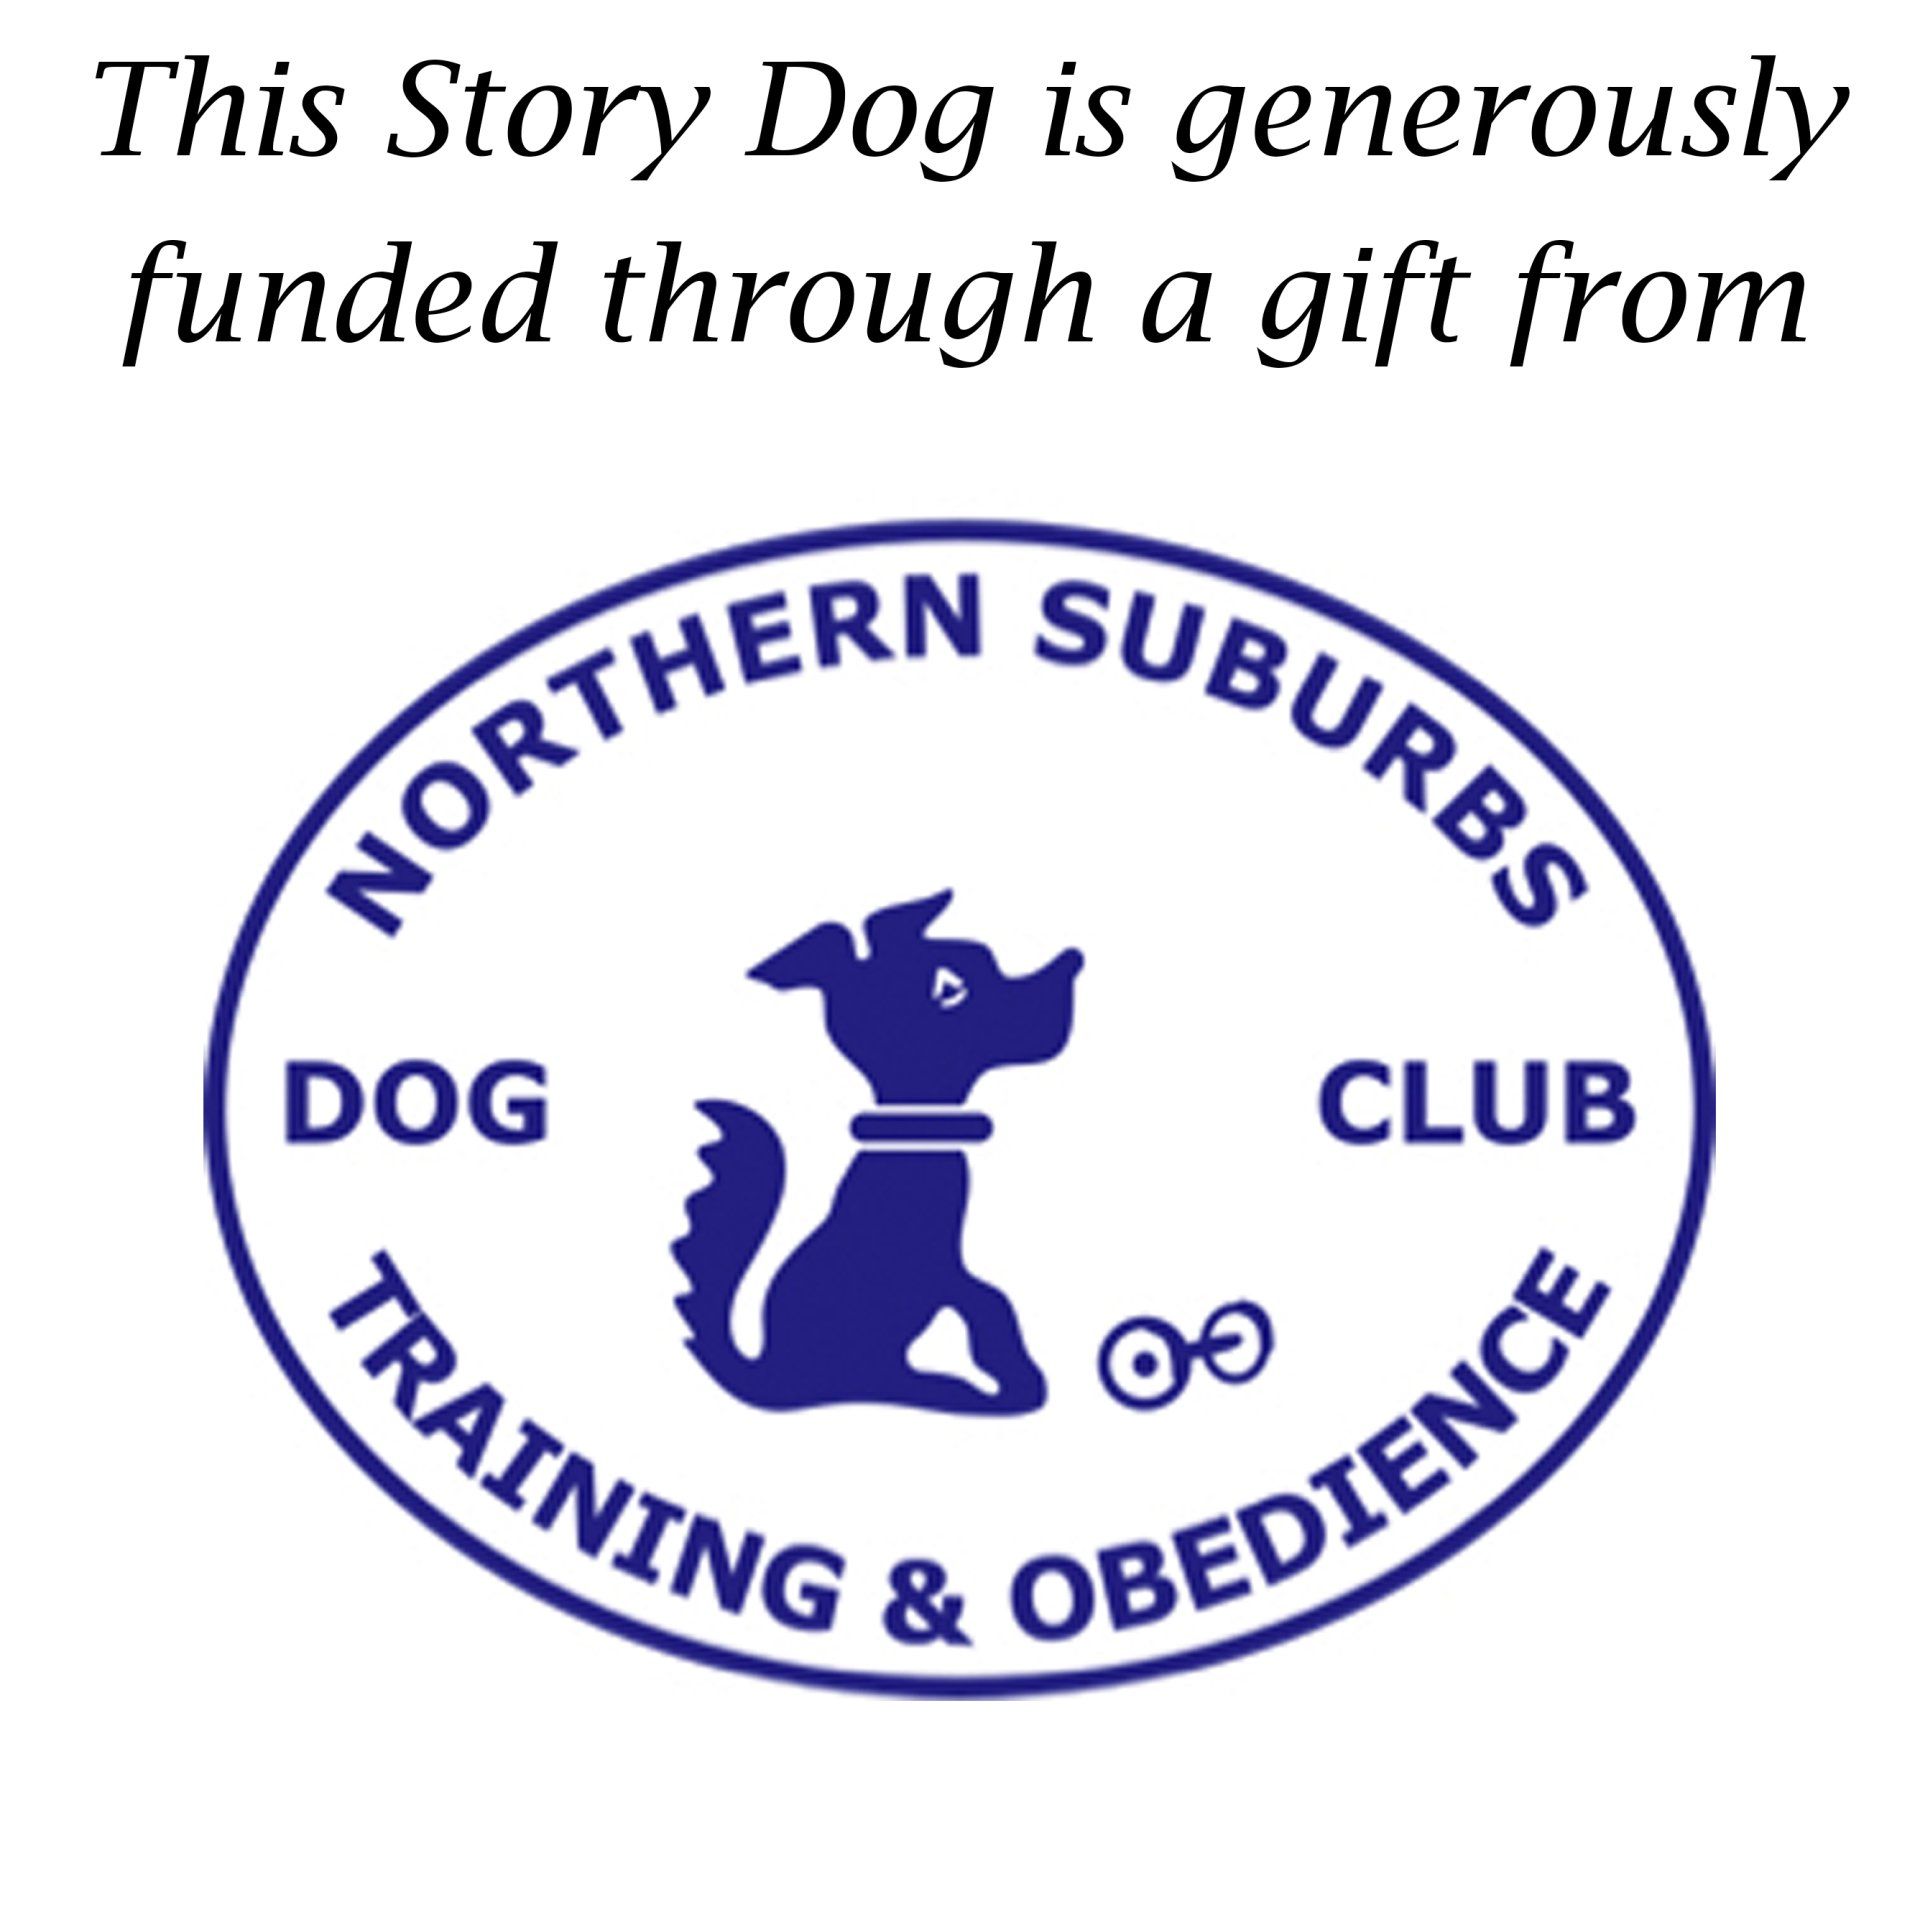 Northern Suburbs Training and Obedience Dog Club